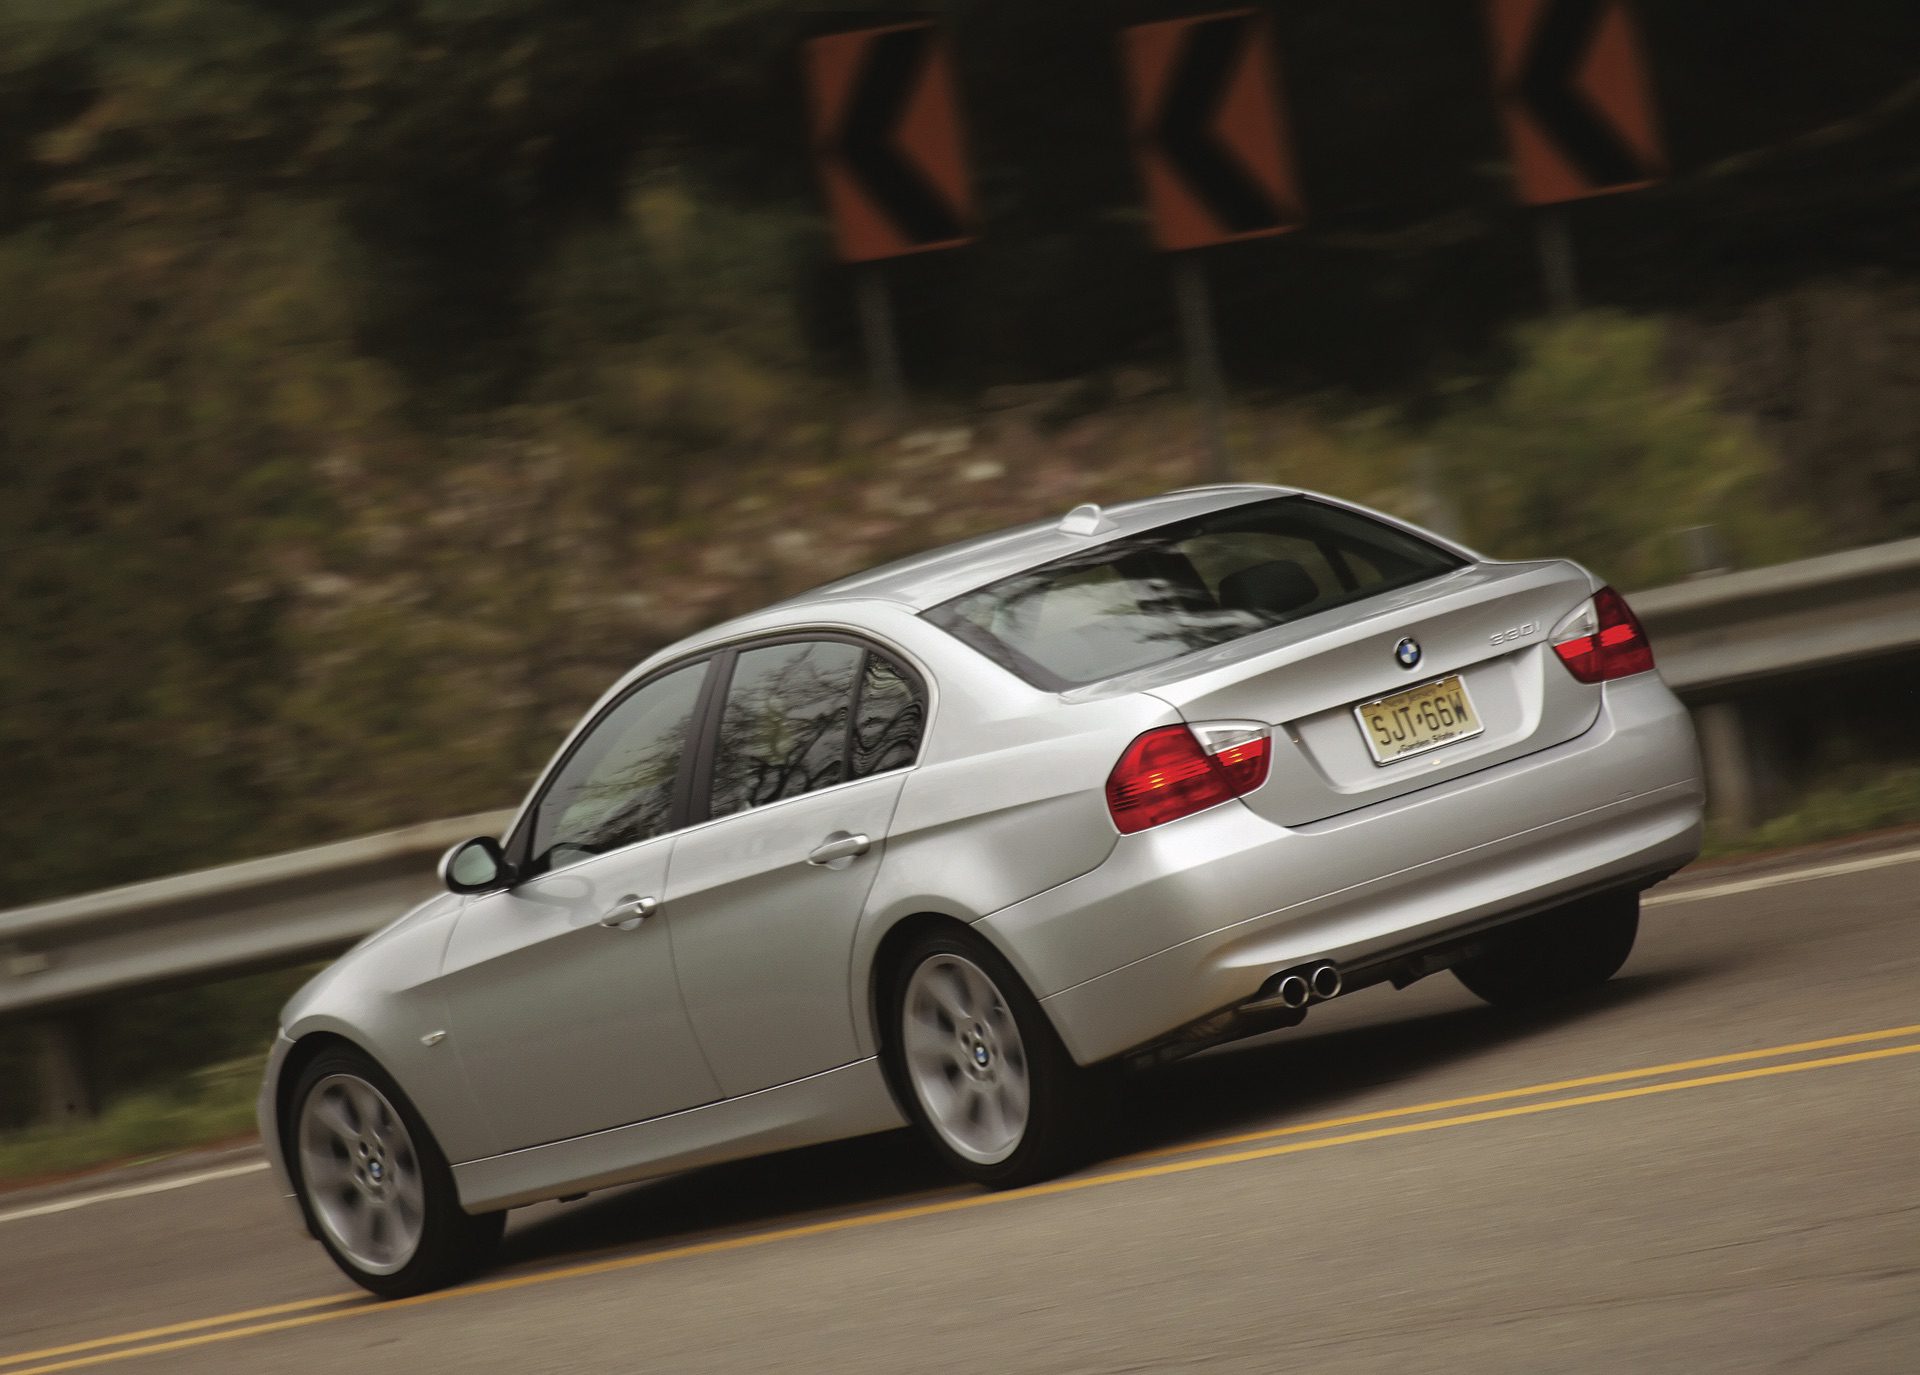 BMW 3 Series 5th Generation (E90) - What To Check Before You Buy